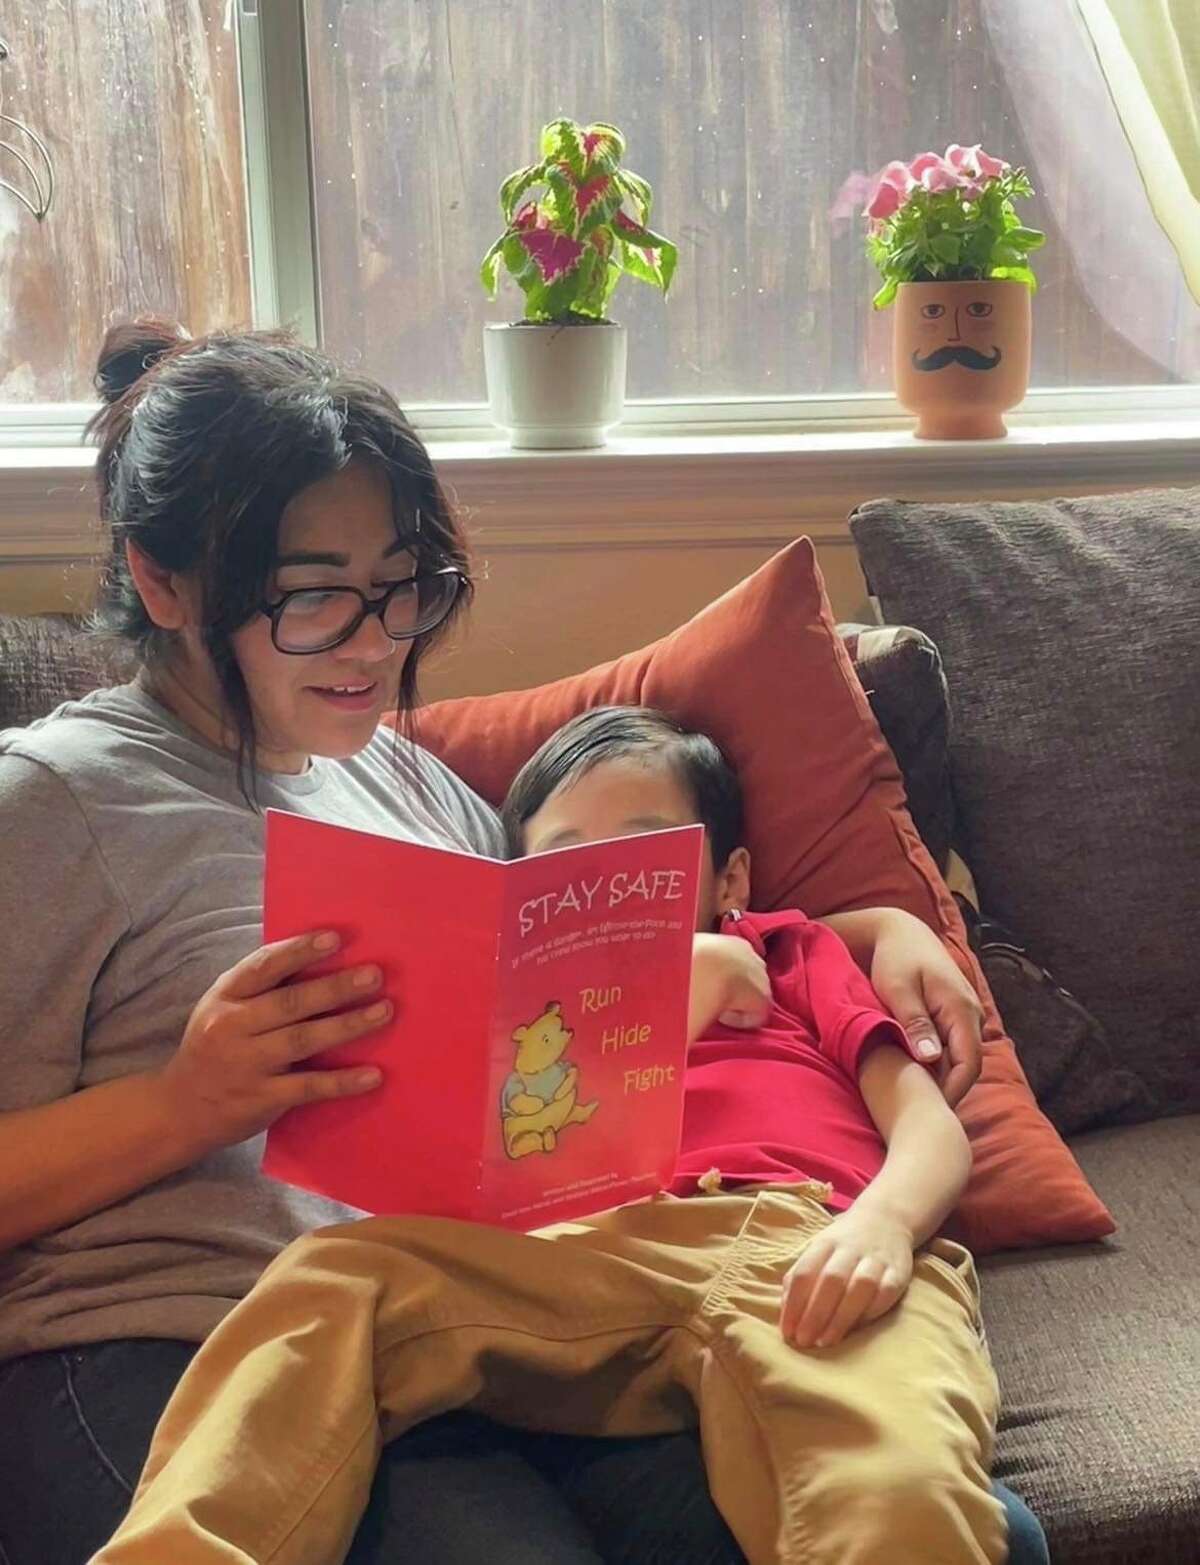 Cindy Campos reads the book "Stay Safe" to her son in Dallas. Cindy Campos' 5-year-old son was so excited about the book that had been sent home with him from school featuring Winnie-the-Pooh that he wanted to read it immediately. But her heart sank as she flipped through the pages advising children what to do if “danger is near,” including locking doors, turning off the lights and quietly hiding till police arrive. (Cindy Campos via AP)